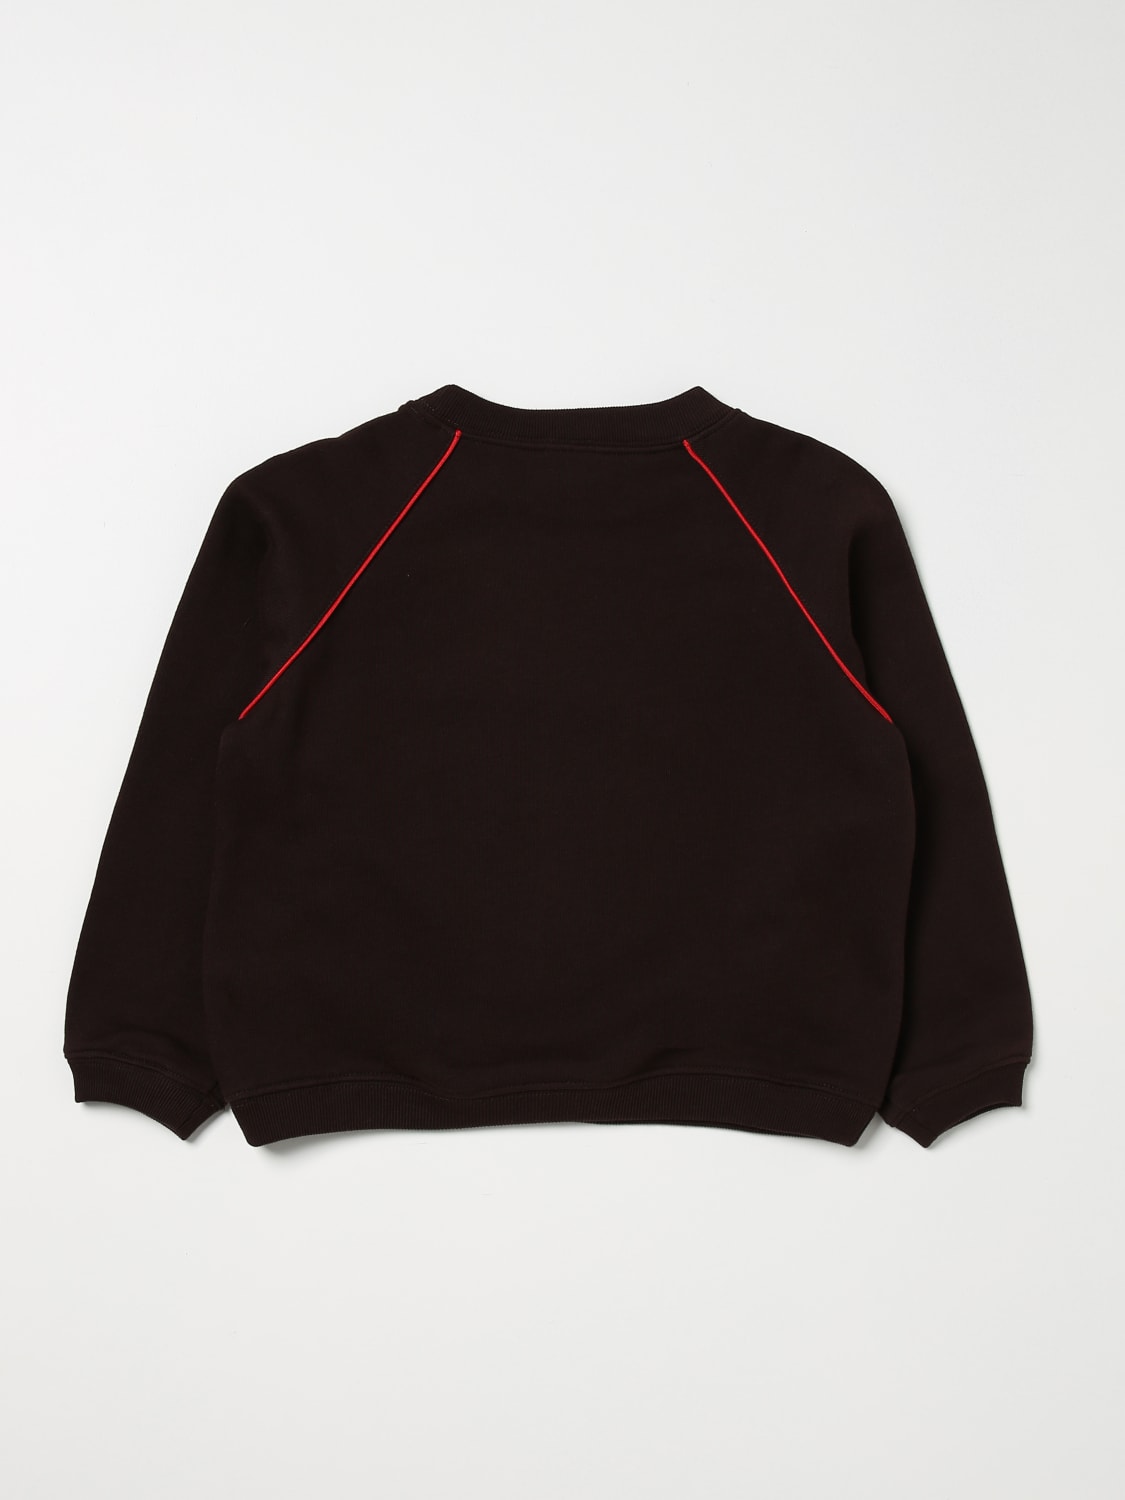 kam tortur Fredag GUCCI: sweater for boys - Brown | Gucci sweater 737610XJFVS online at  GIGLIO.COM